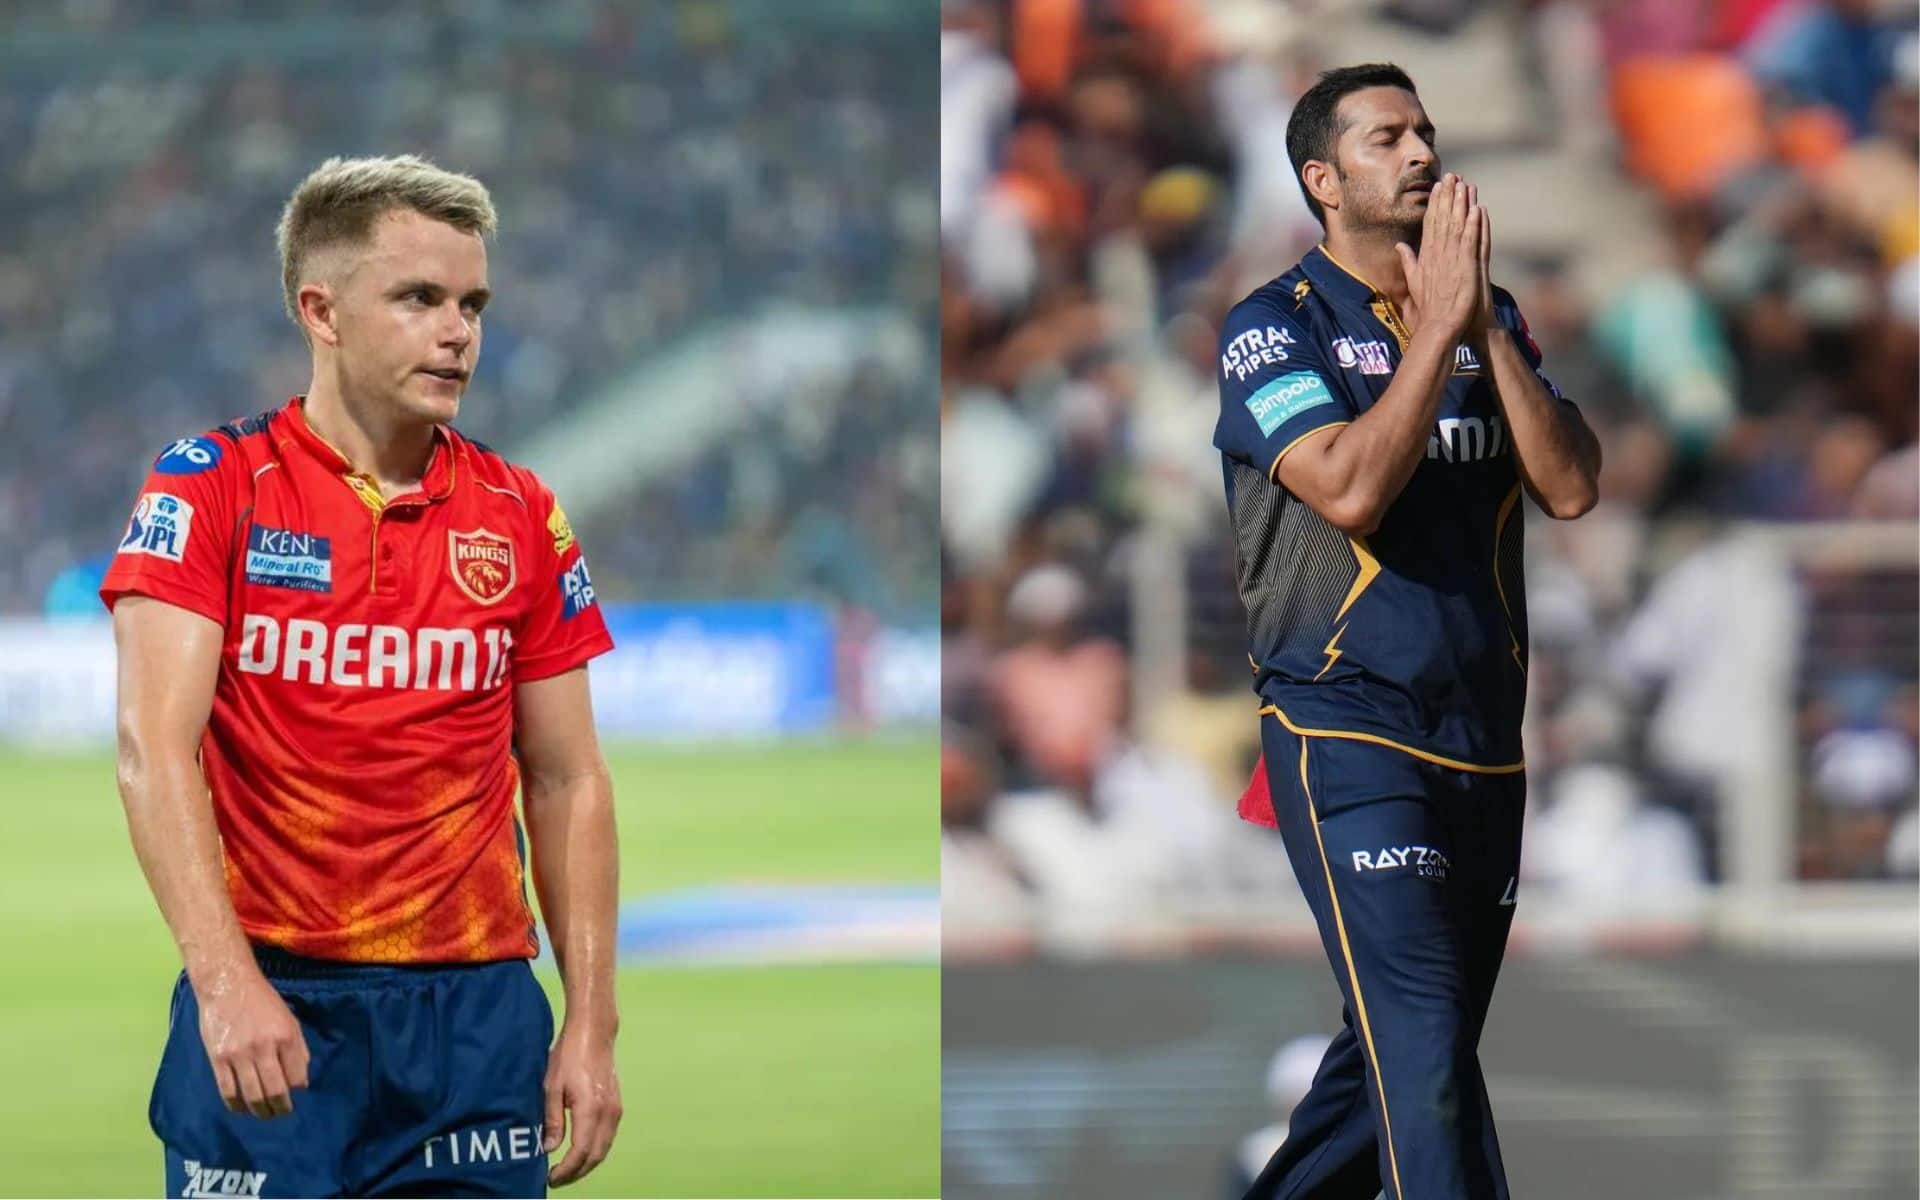 Sam Curran and Mohit Sharma could be key bowlers in this game [iplt20.com]